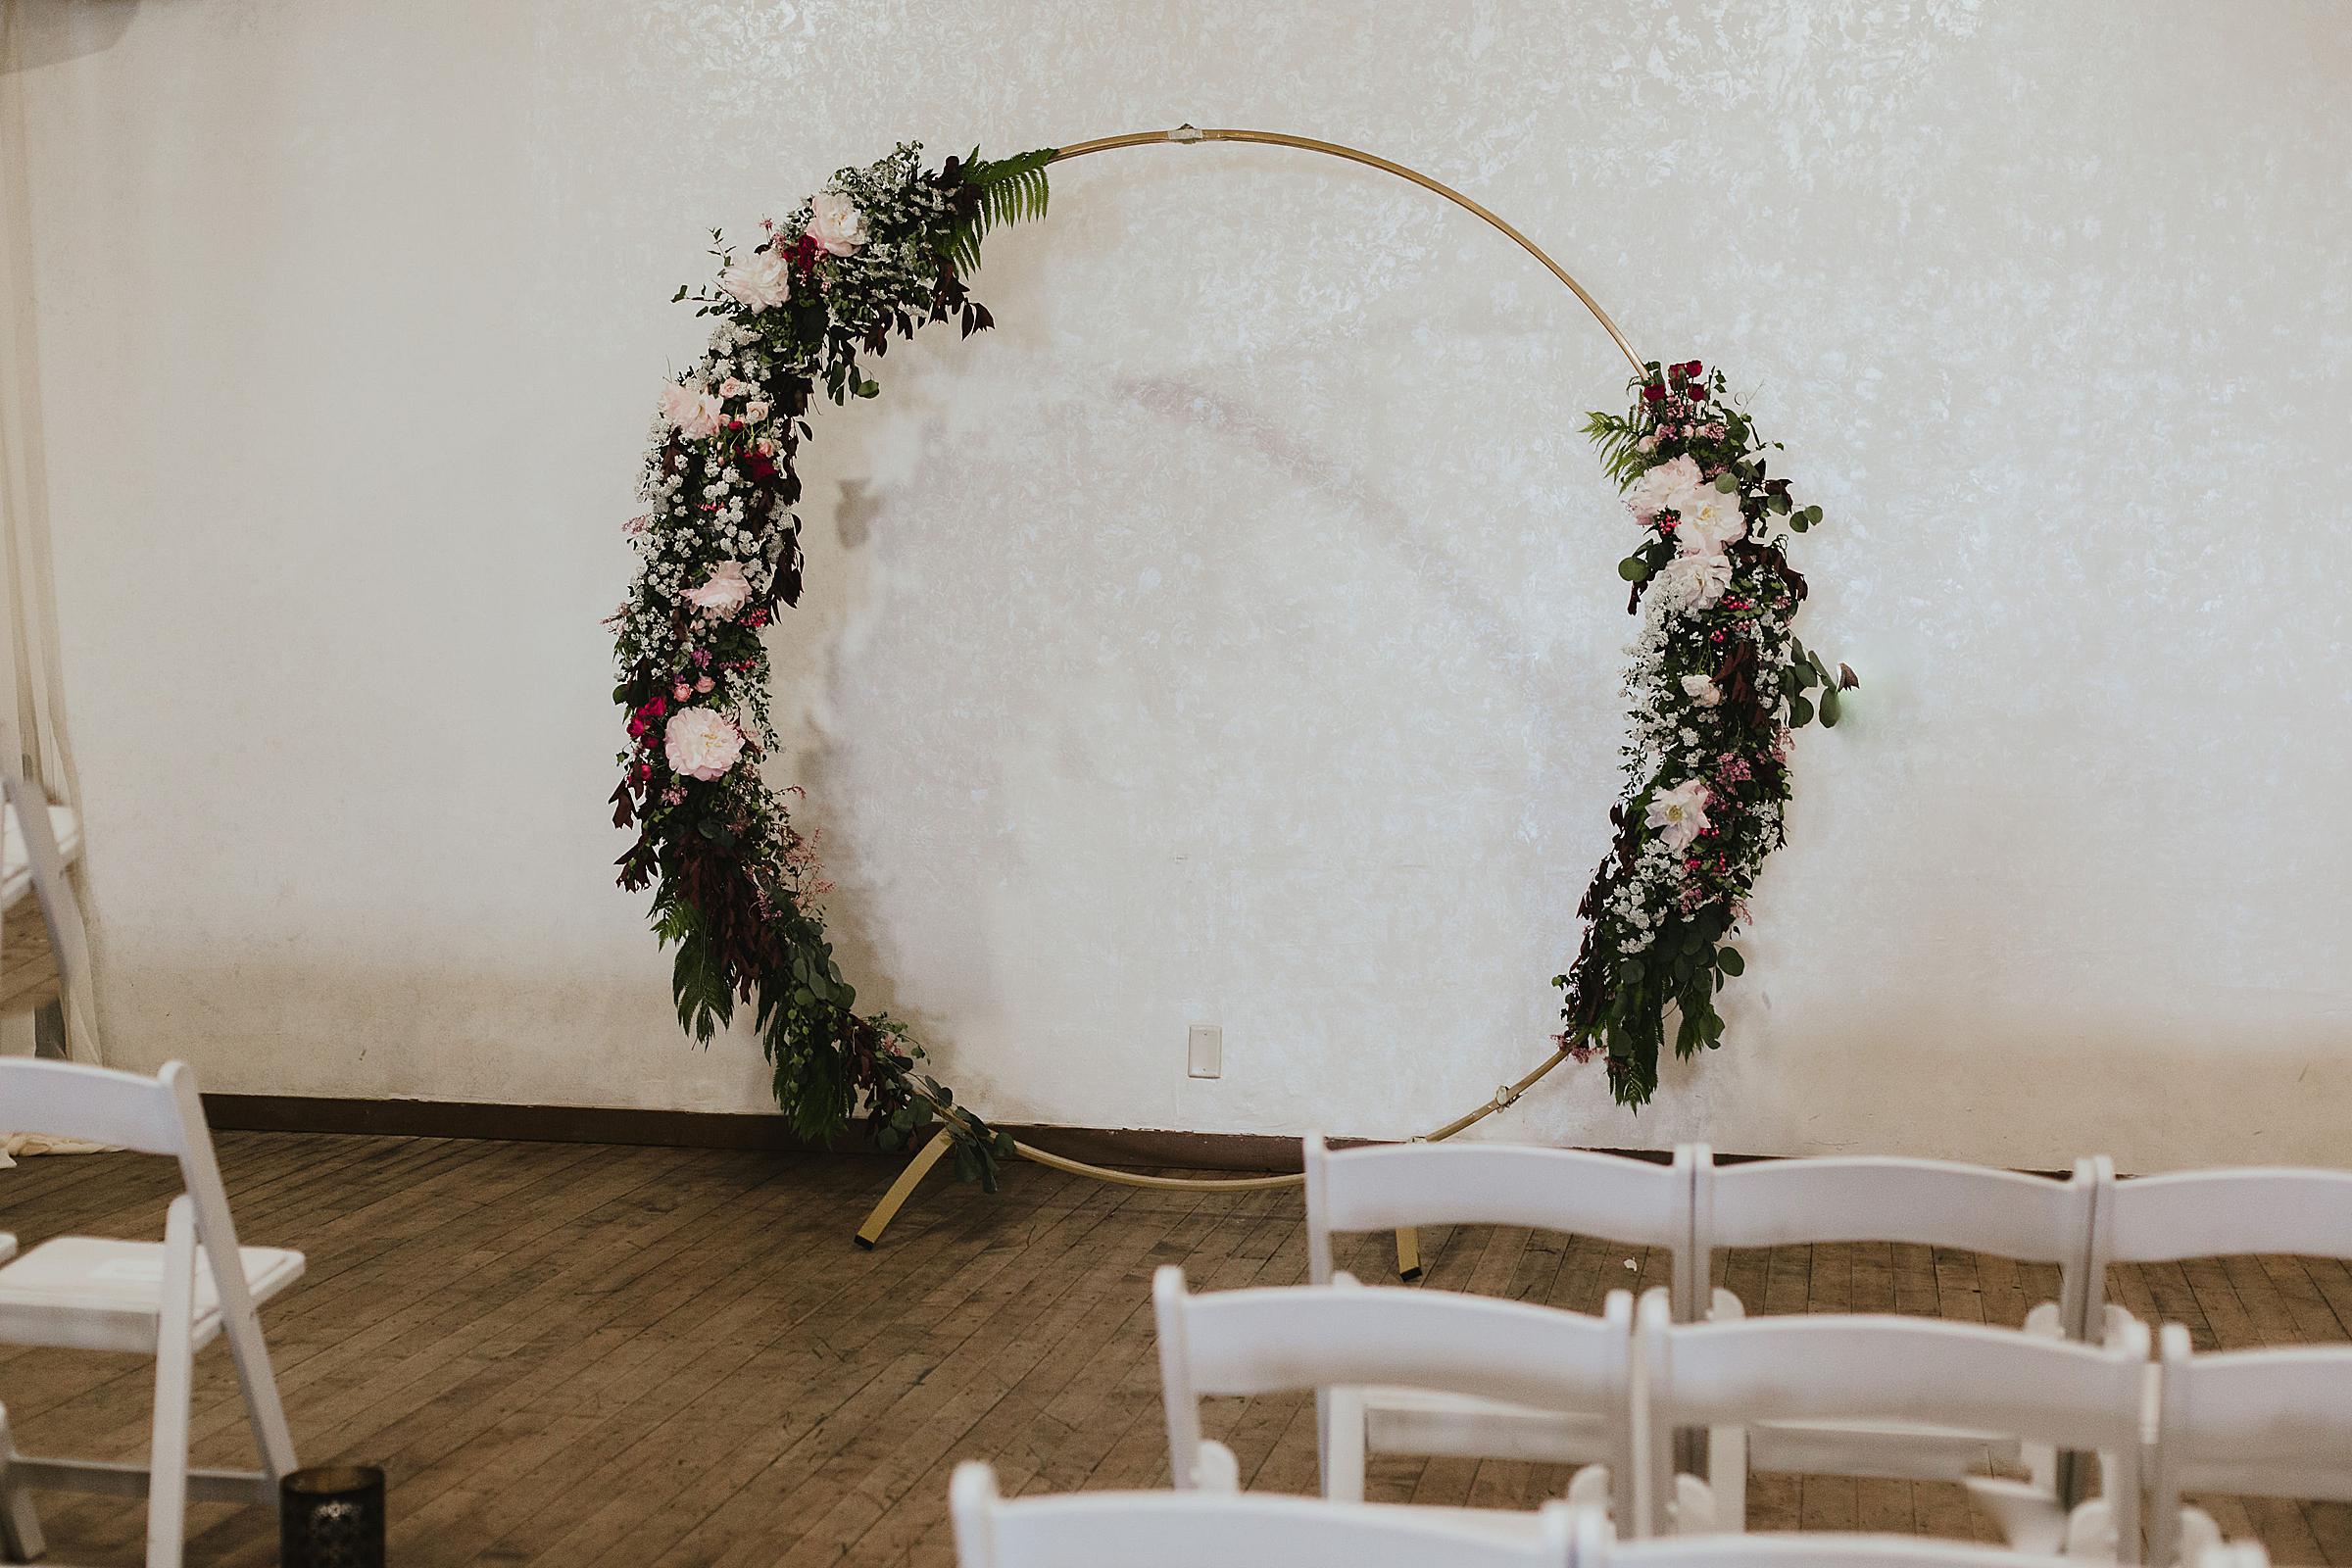 Omaha Wedding; Ceremony Details at Vintage Ballroom in the Old Market; Florals by One & Only; Photographed by Juliana Montane Photography